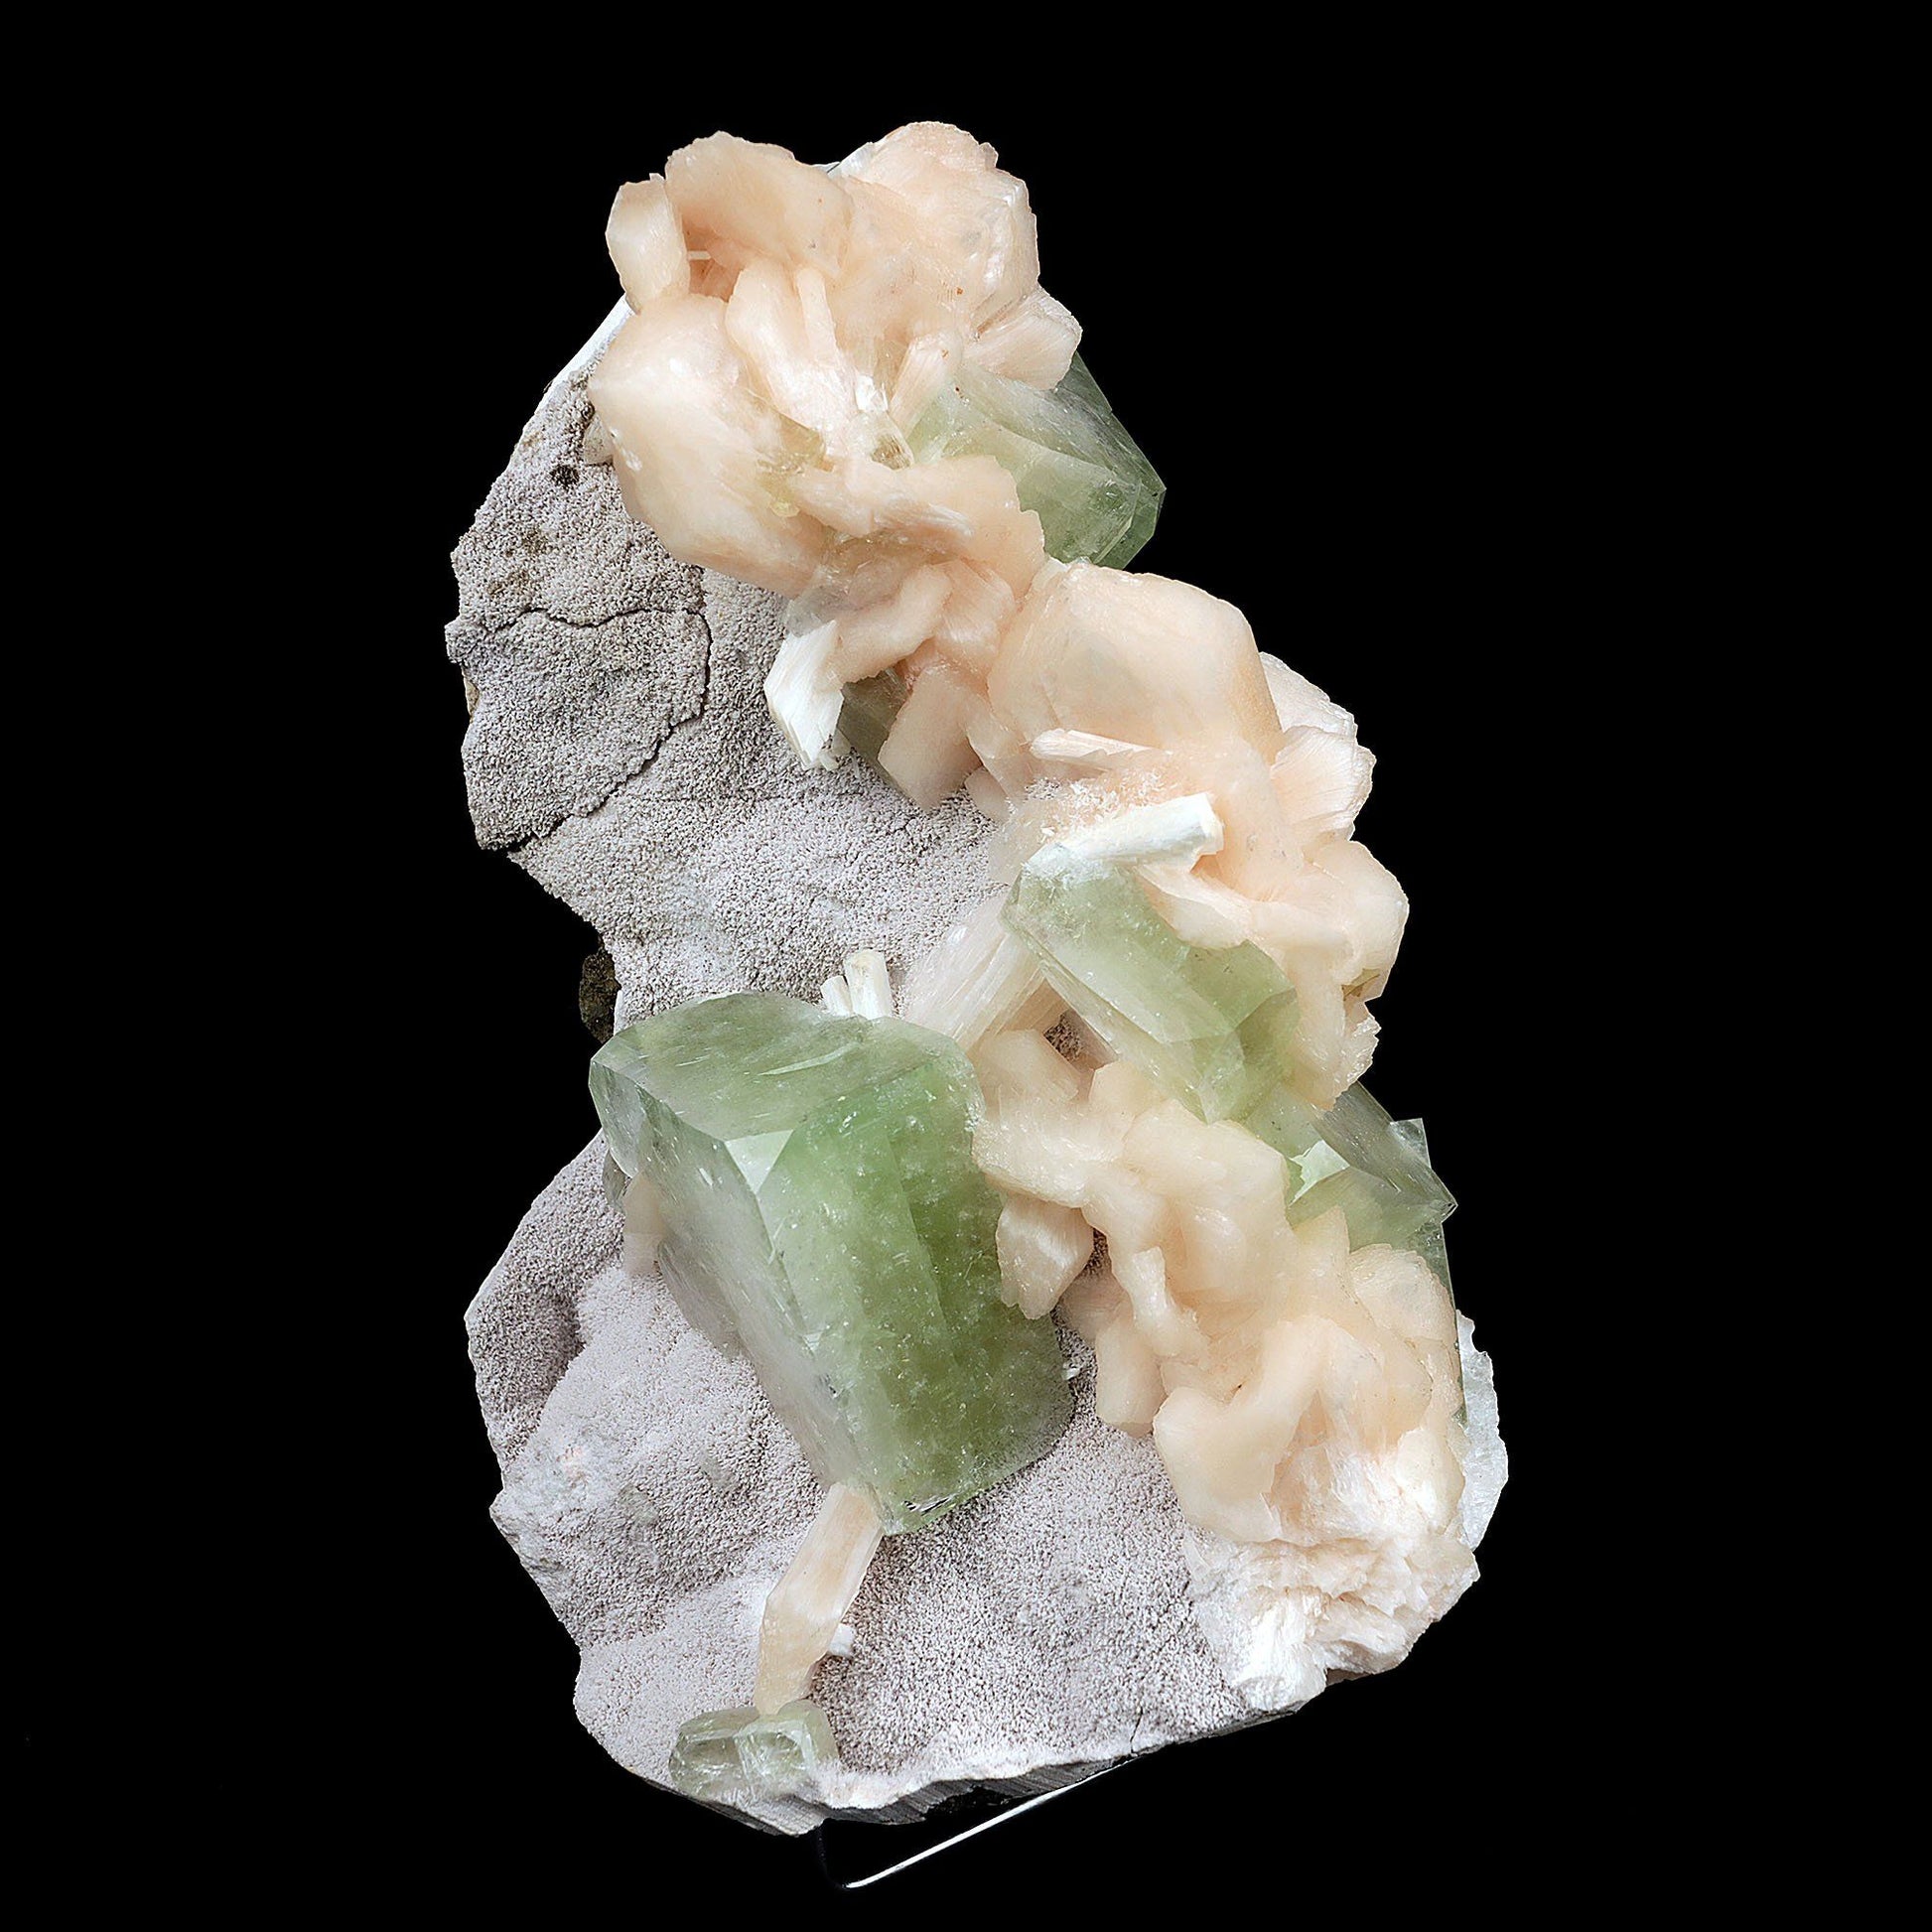 Apophyllite Green Cubes with Stilbite Natural Mineral Specimen # B 371…  https://www.superbminerals.us/products/apophyllite-green-cubes-with-stilbite-natural-mineral-specimen-b-3718  Features:A very aesthetic piece featuring a matrix densely coated with miniature, beige Stilbite crystals with a cluster of lustrous, larger light-beige Stilbite crystals at the base, all hosting a crown of transparent, mint-green Apophyllite pseudocubic (rectangular) crystals. Great contrast, color, symmetry and luste